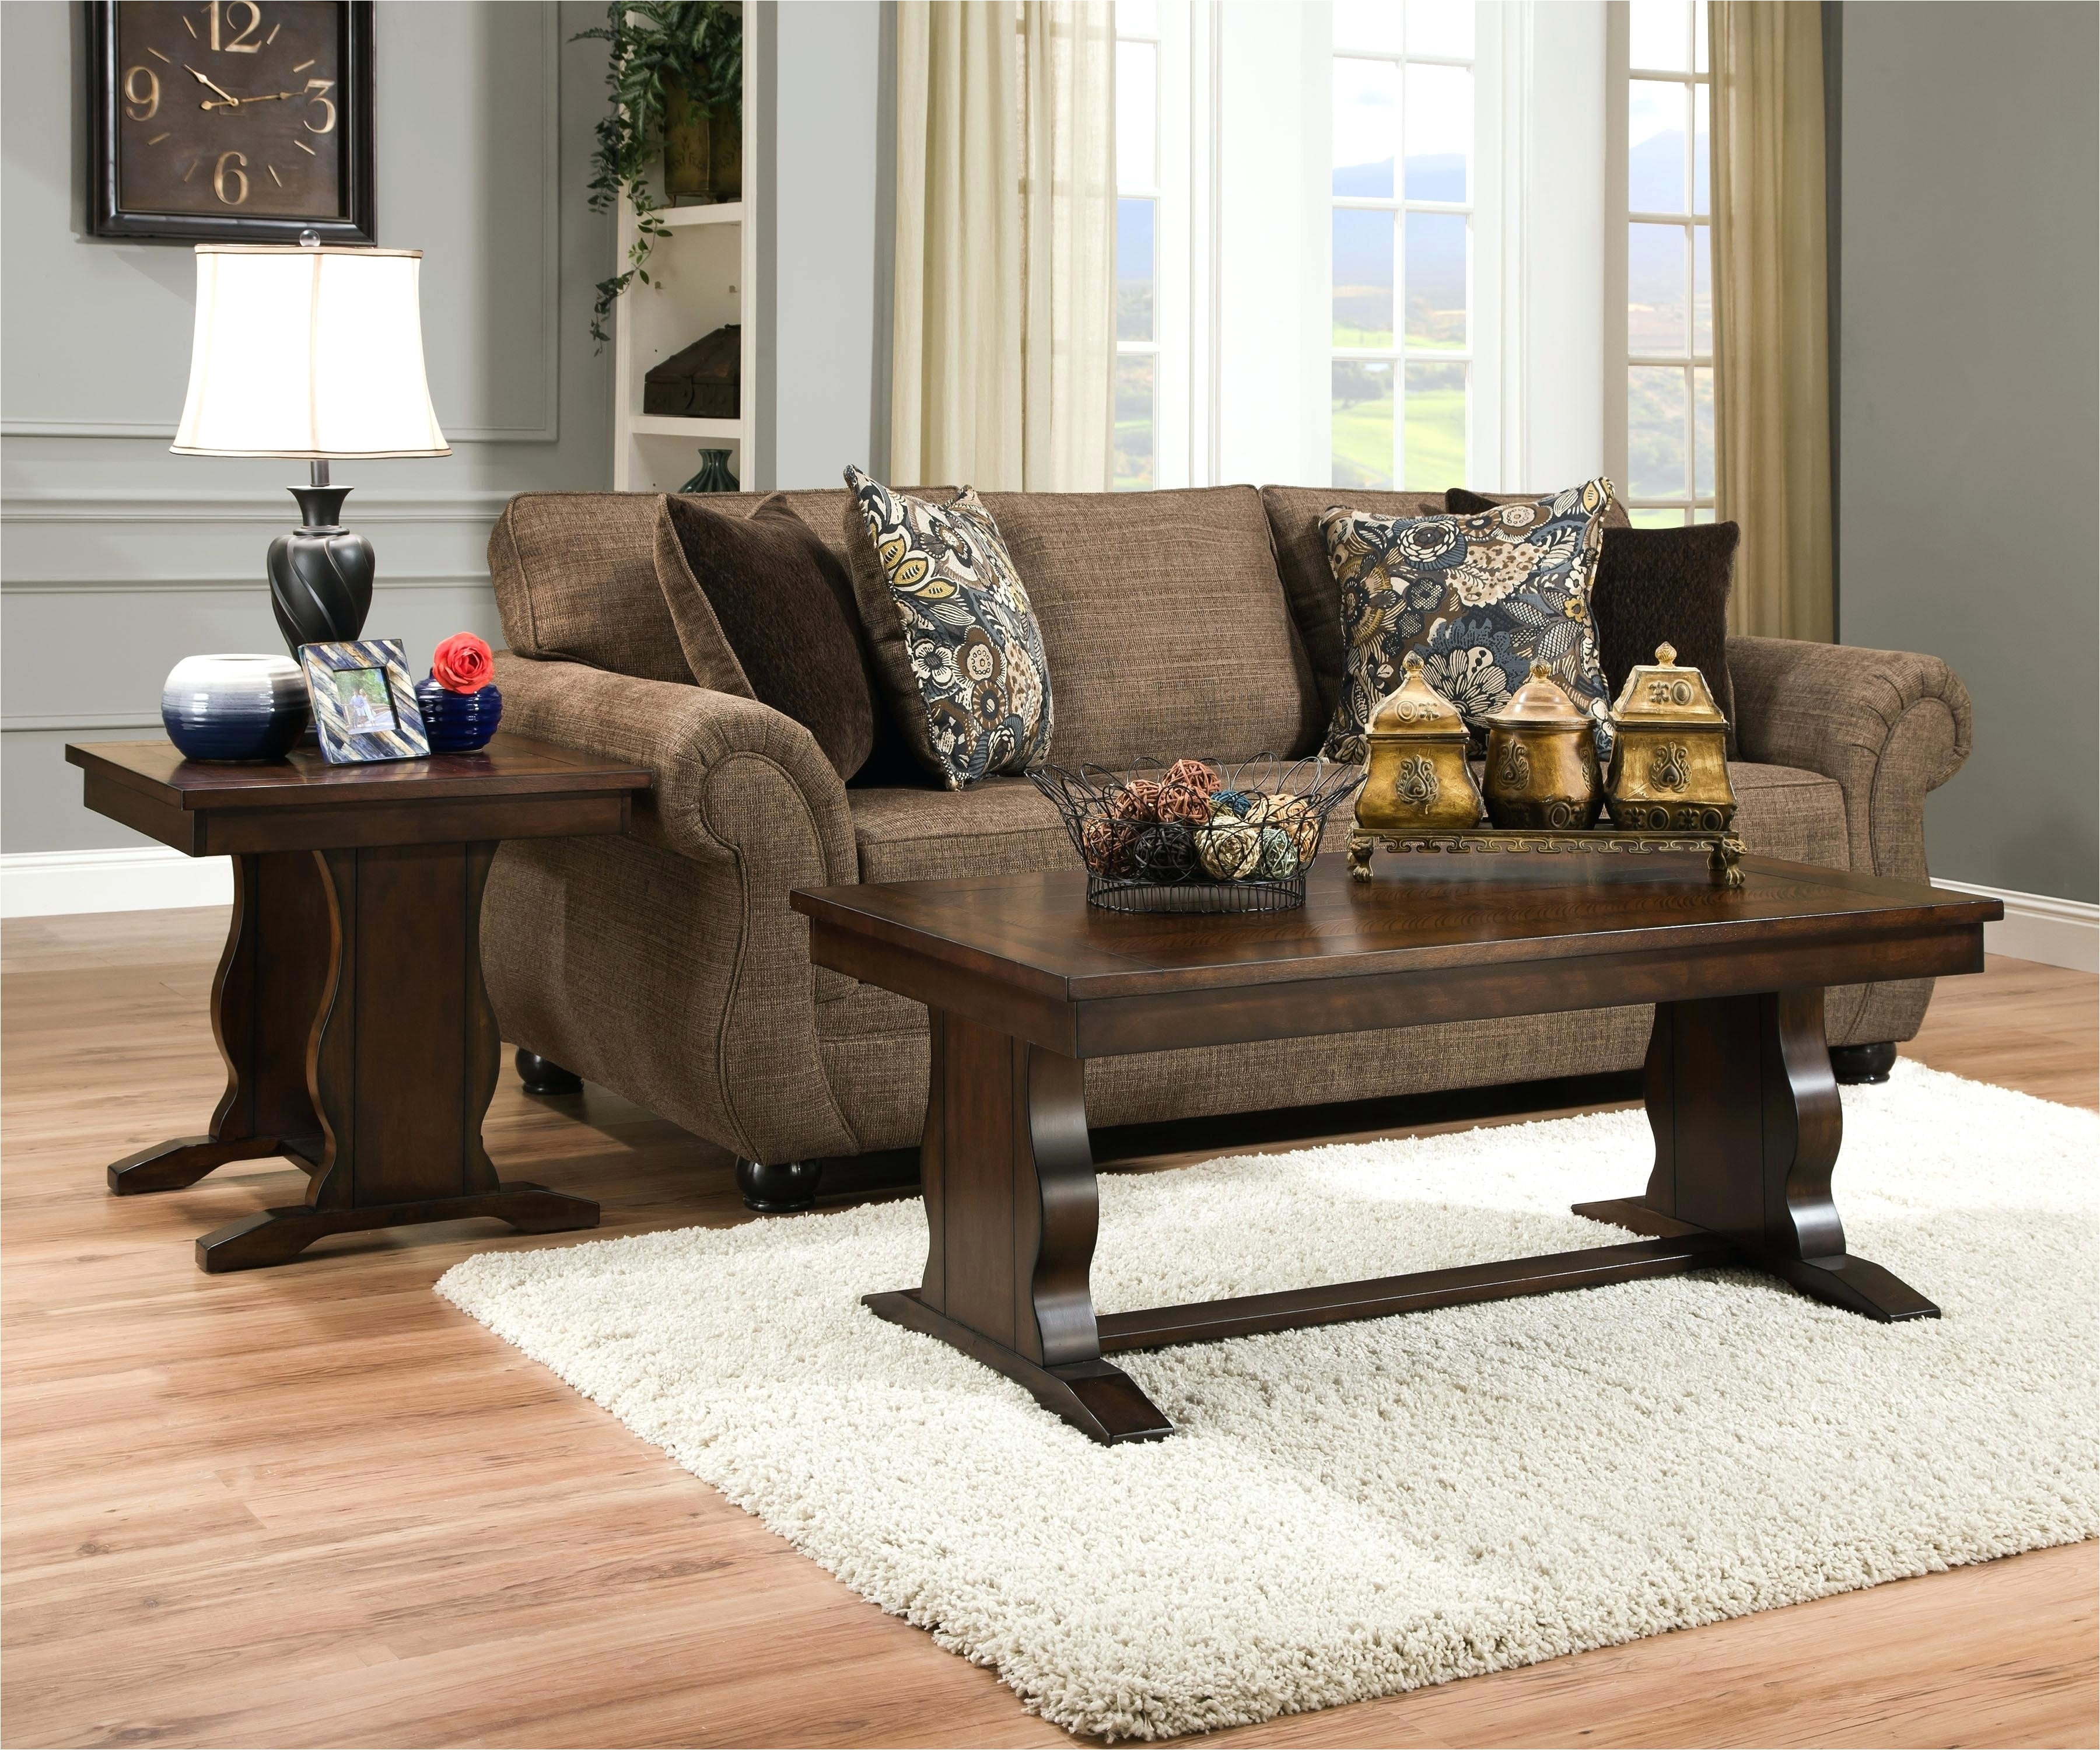 exceptionnel furniture stores in janesville wi awesome milwaukee furniture stores in furniture stores janesville wi